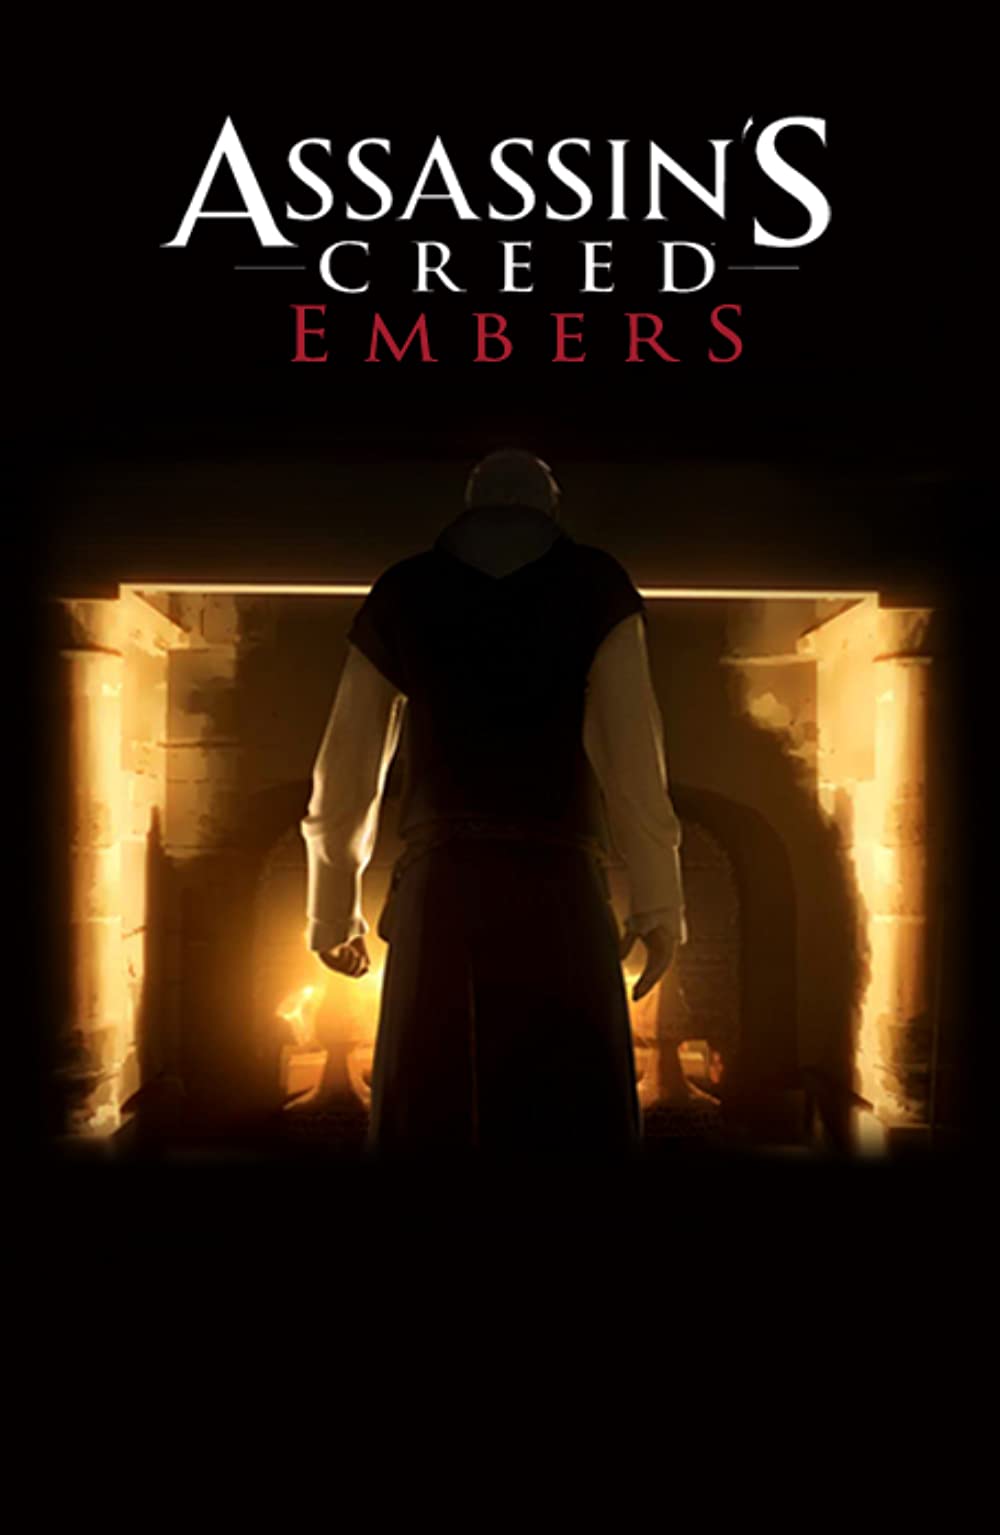 Assassin's Creed: Embers (Short 2011)